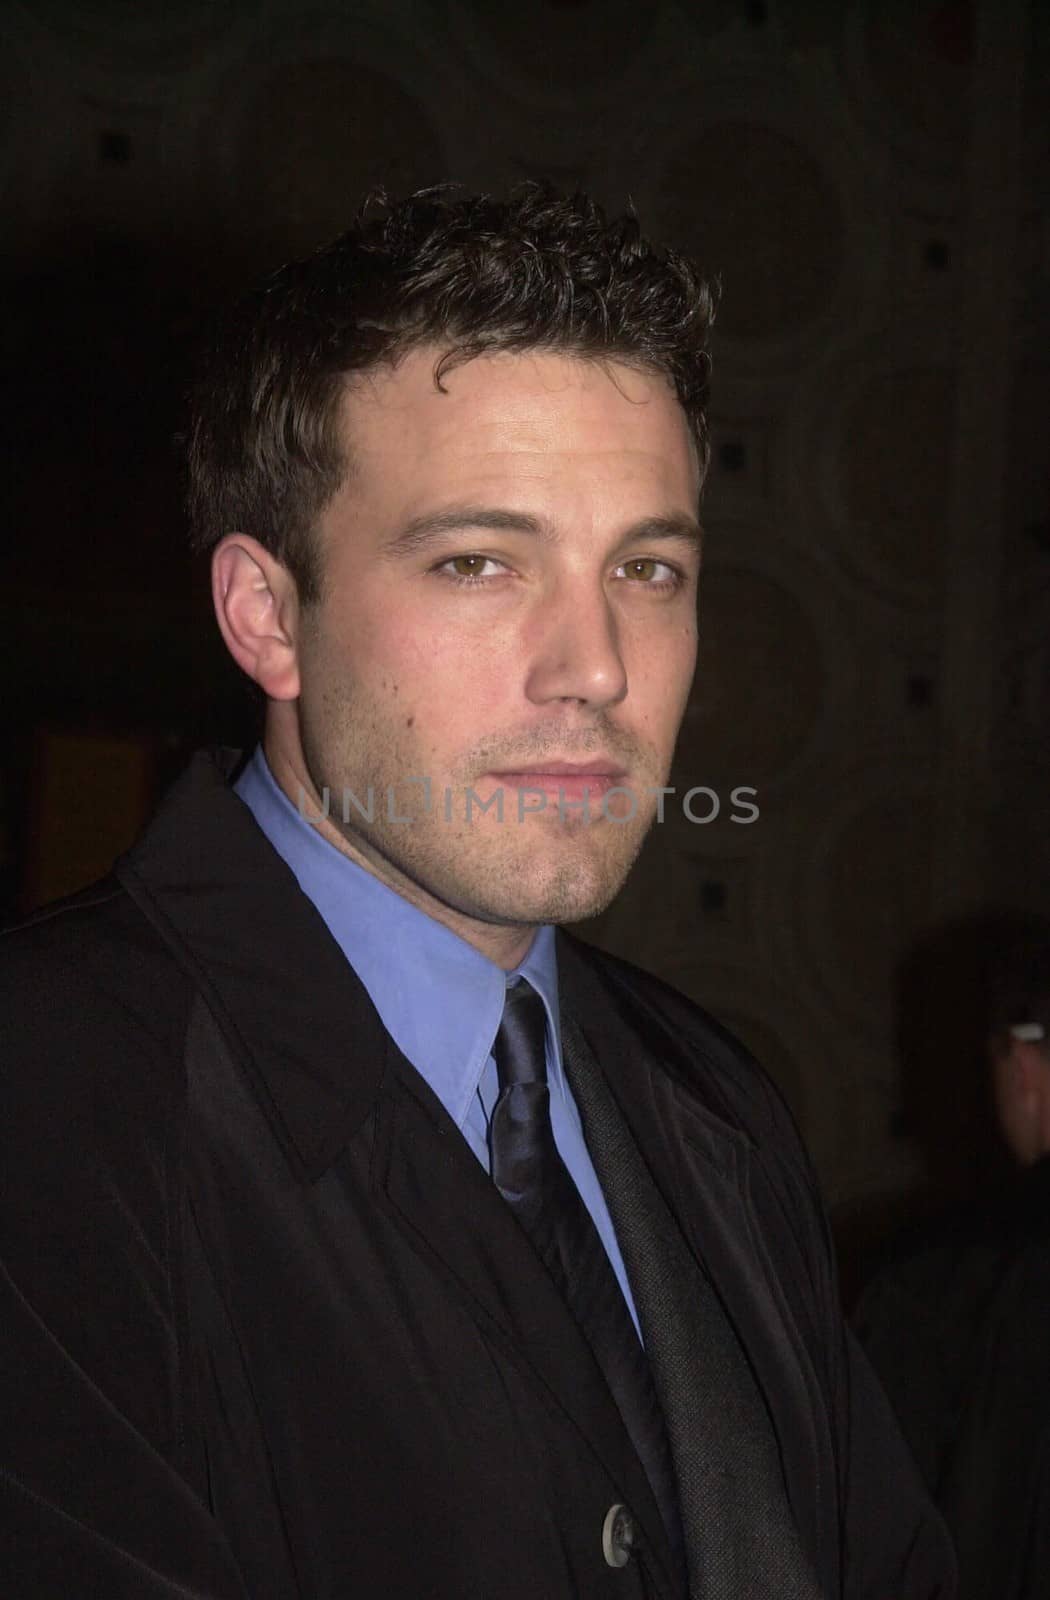 Ben Affleck at the premiere of Dimension Film's "Reindeer Games" in Hollywood, 02-21-00